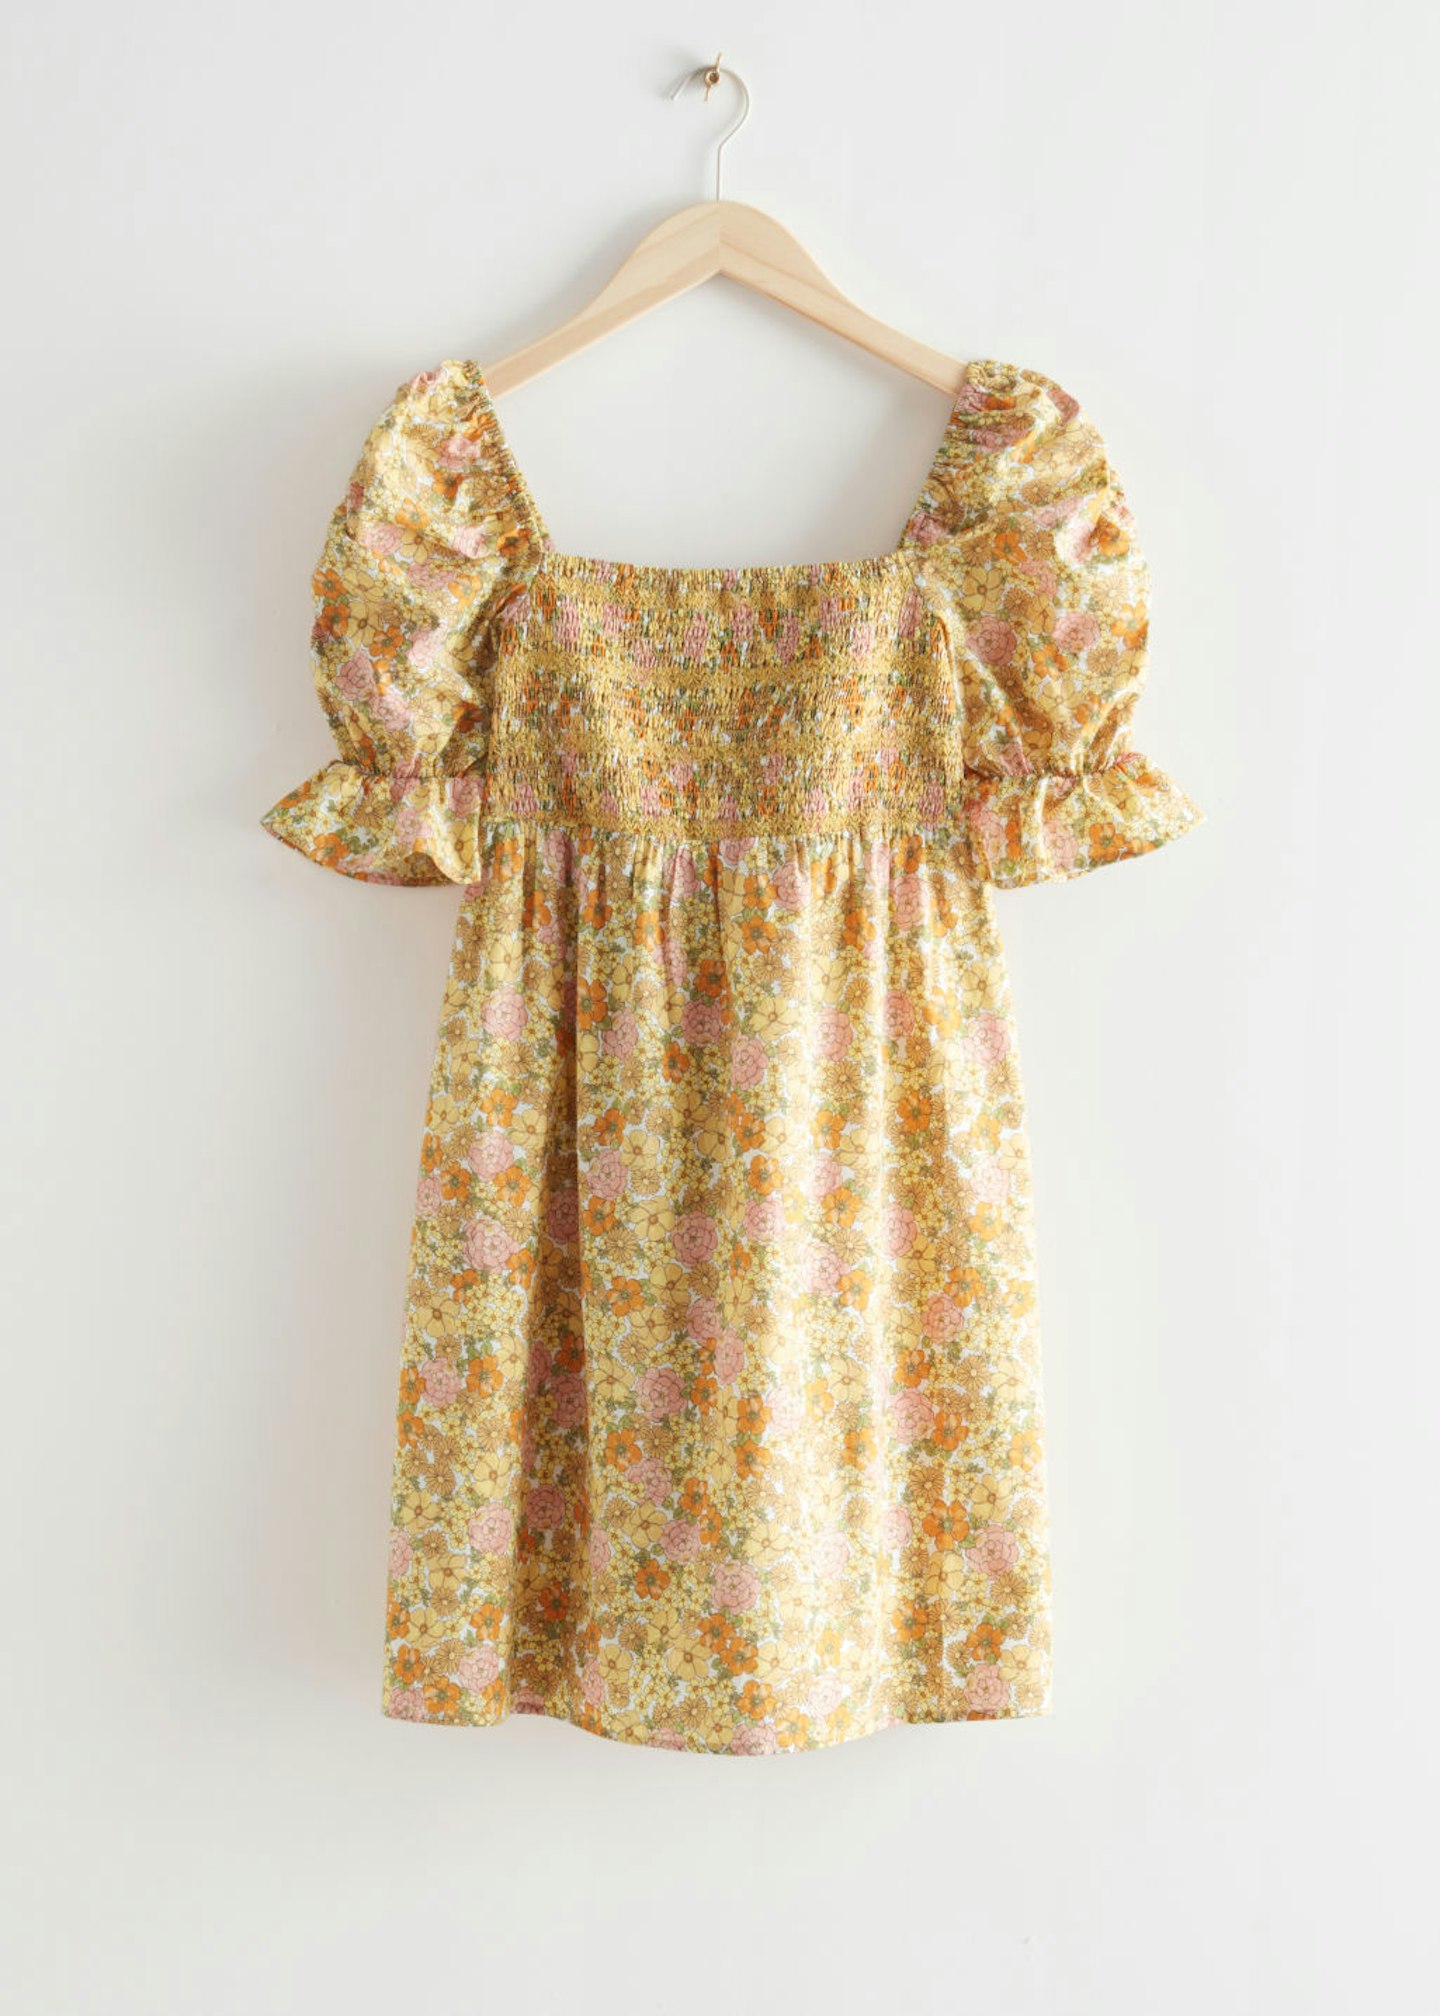 & Other Stories, Printed Puff Sleeve Mini Dress, £65